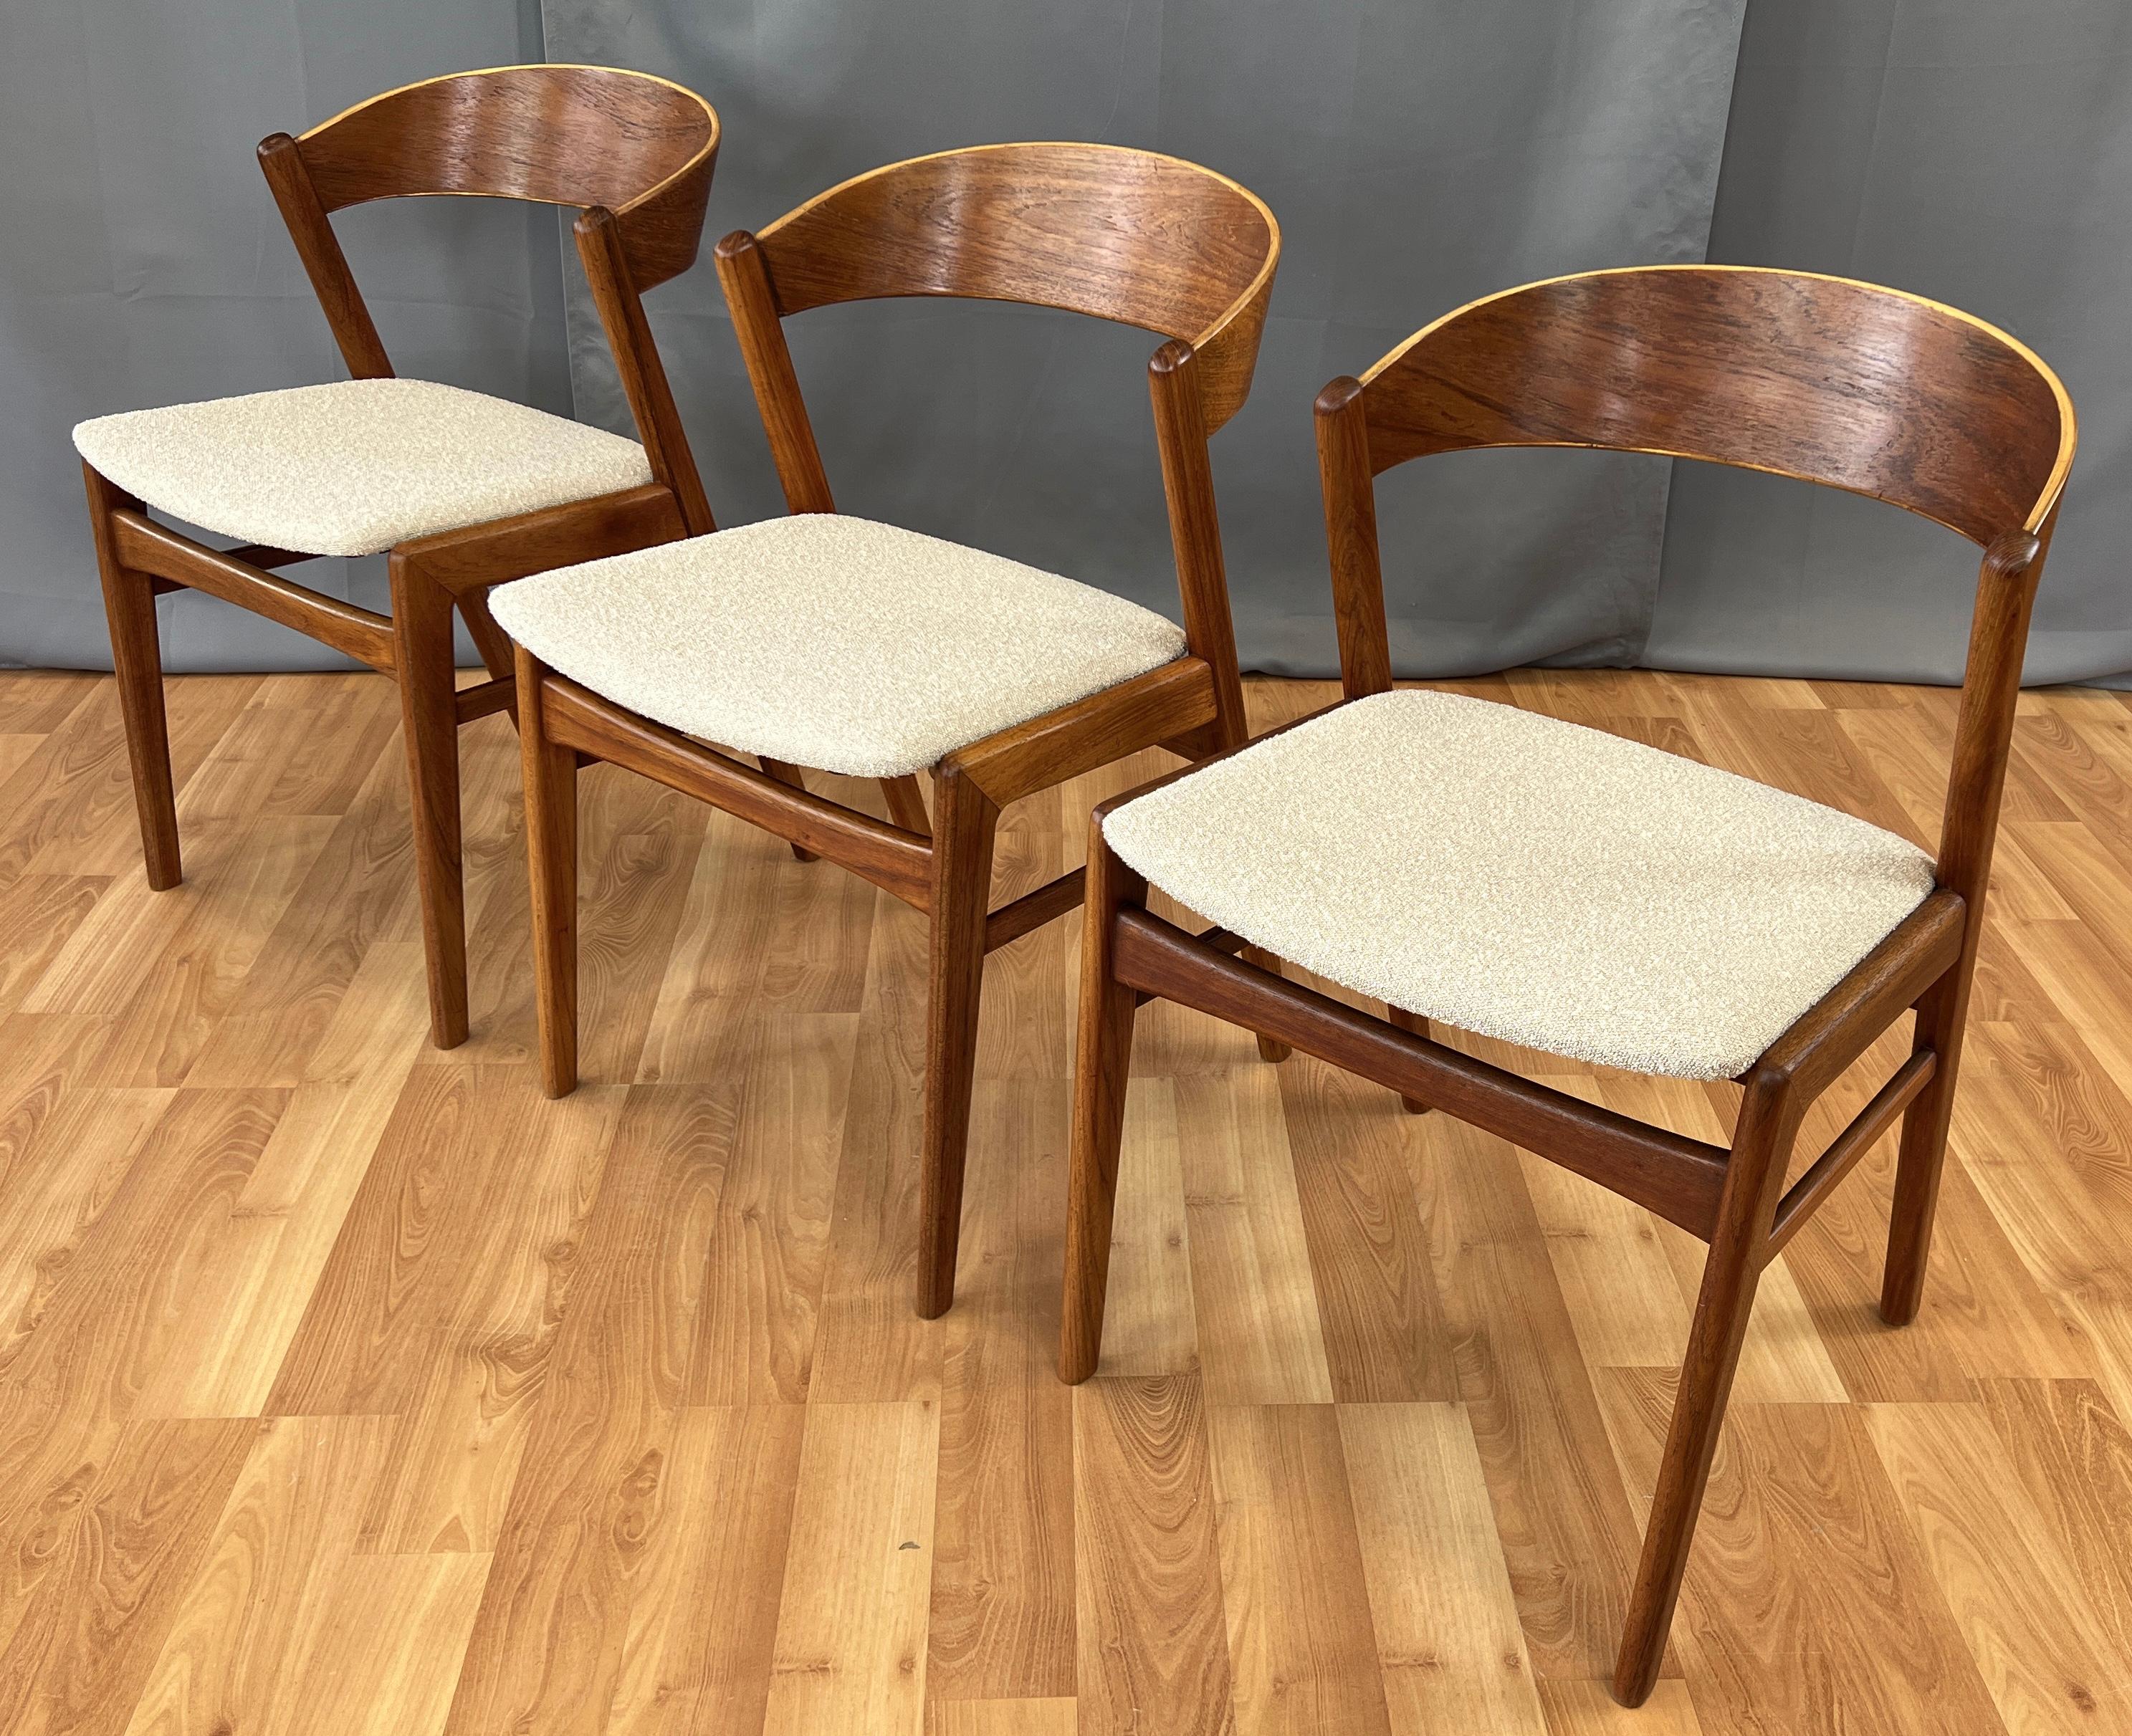 Offered here are the classic Ribbon Back chairs made by Dux of Sweden, all have Teak frames. We only have two available now, the chair in the middle has been sold..
Reupholstered in a Beige color fabric, that feels to a blend. Chair backs hit the